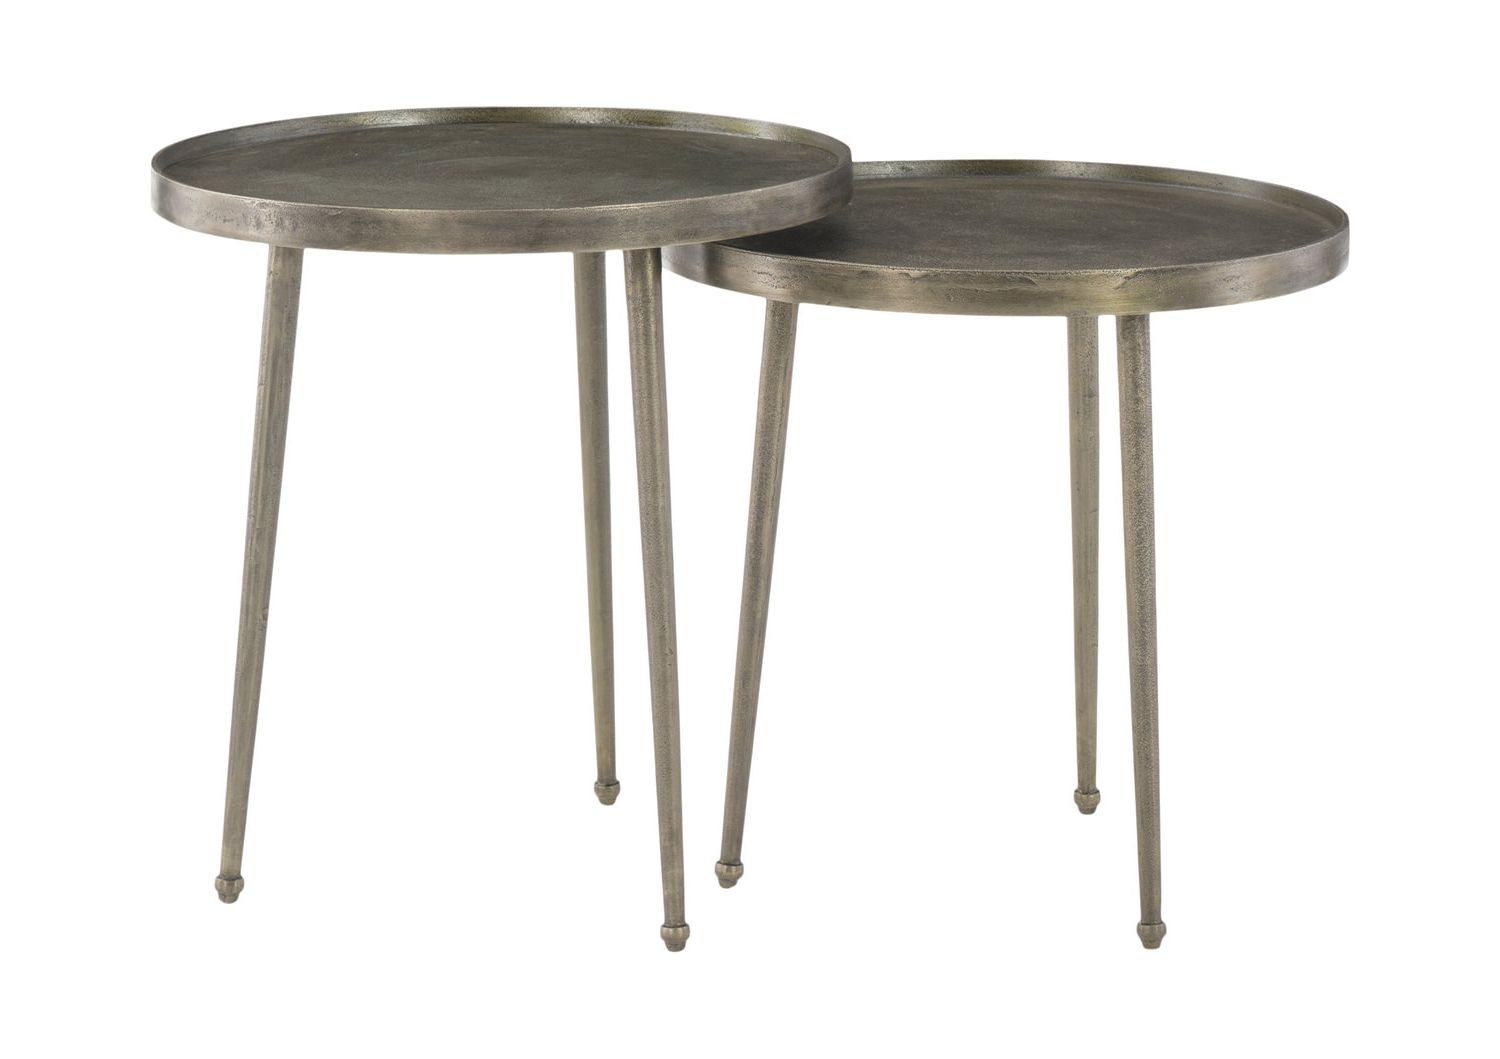 Popular Beige Mosaic Round Outdoor Accent Tables With Regard To Bunching End Tablesbernhardt (View 5 of 15)